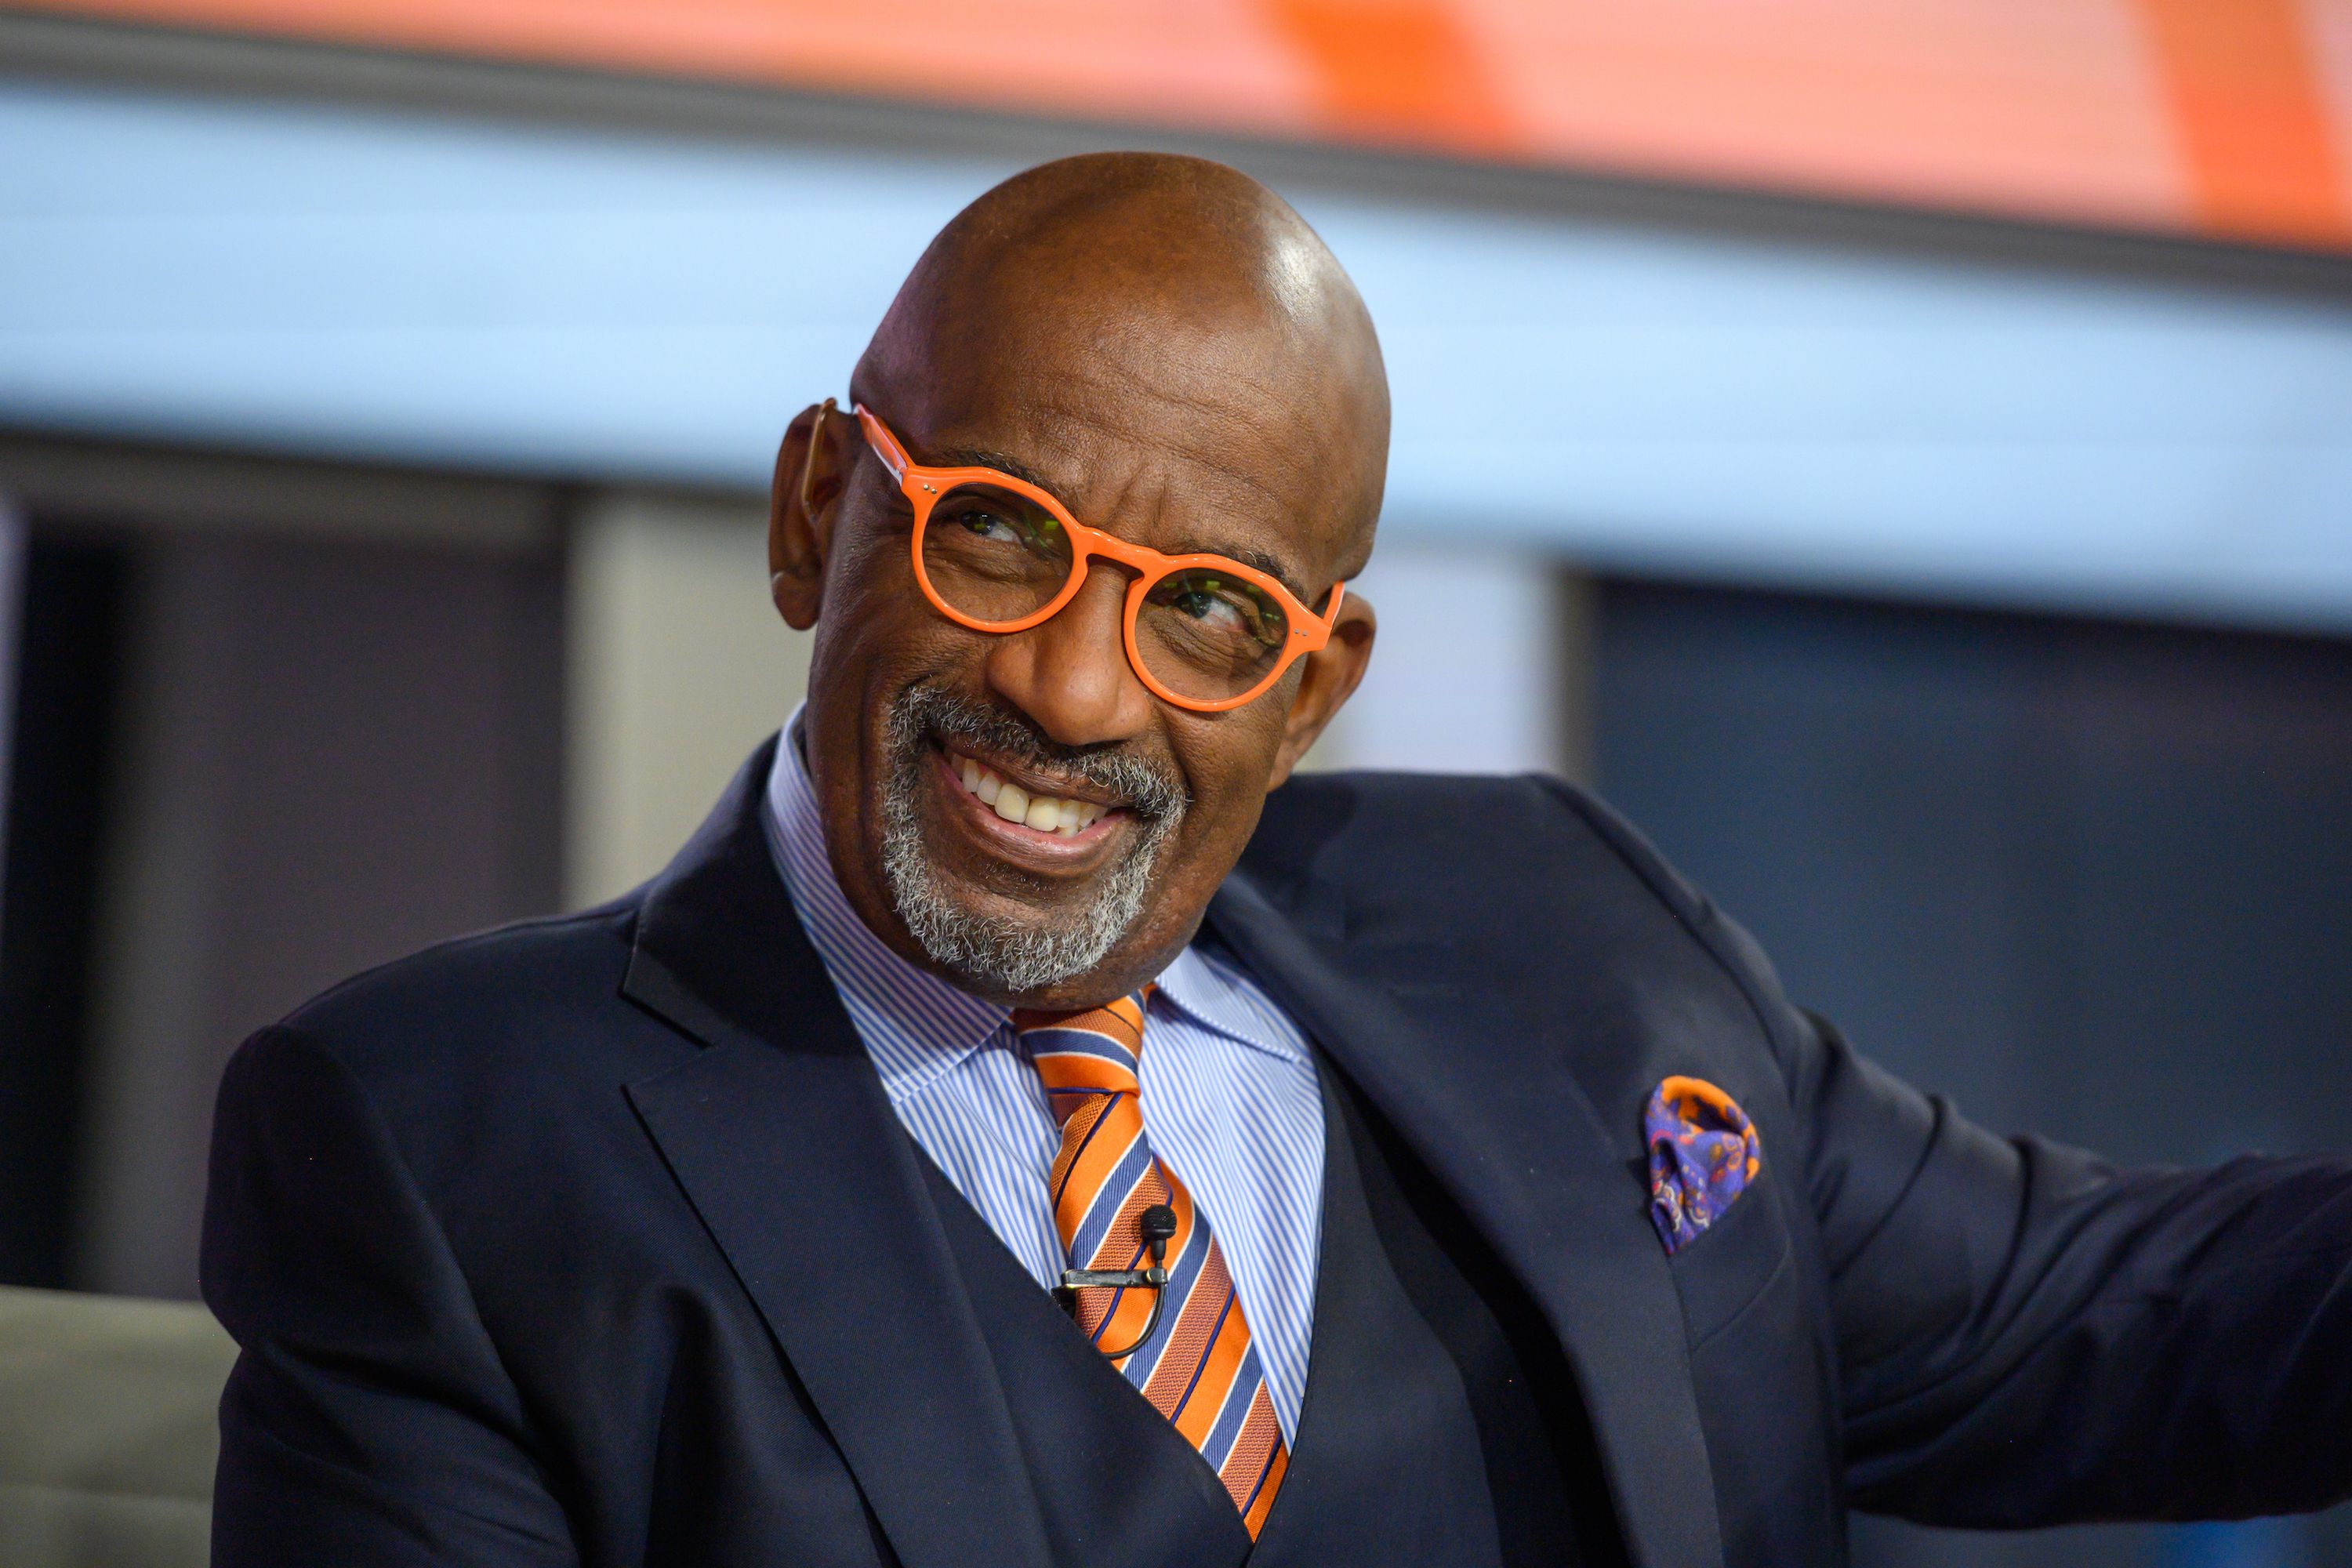 Al Roker News, Articles, Stories & Trends for Today